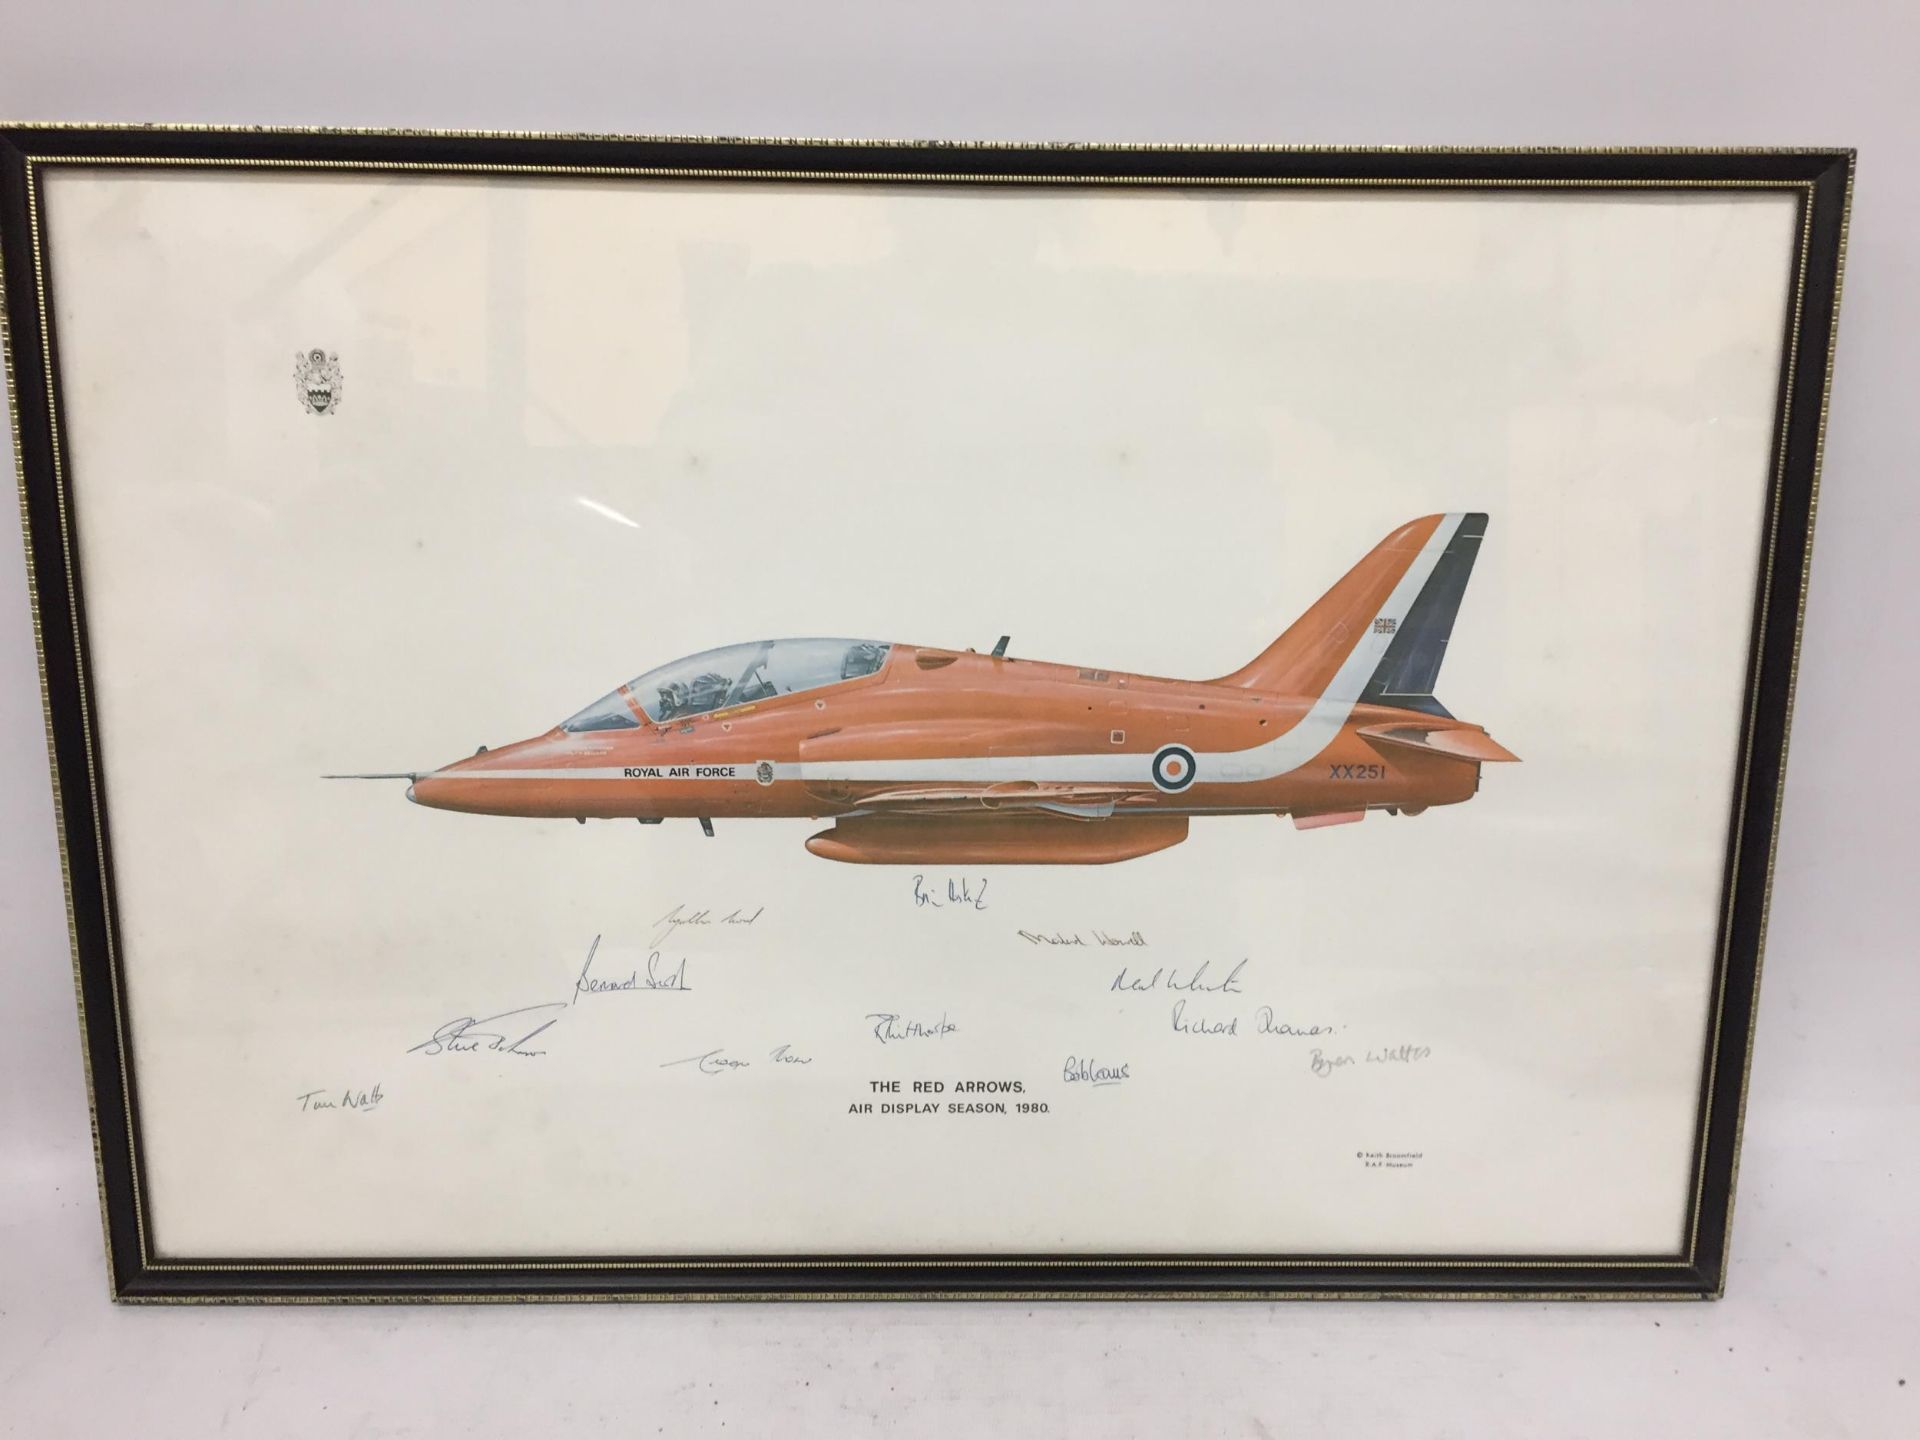 A FRAMED AND SIGNED 'THE RED ARROWS' AIR DISPLAY SEASON, 1980 PICTURE